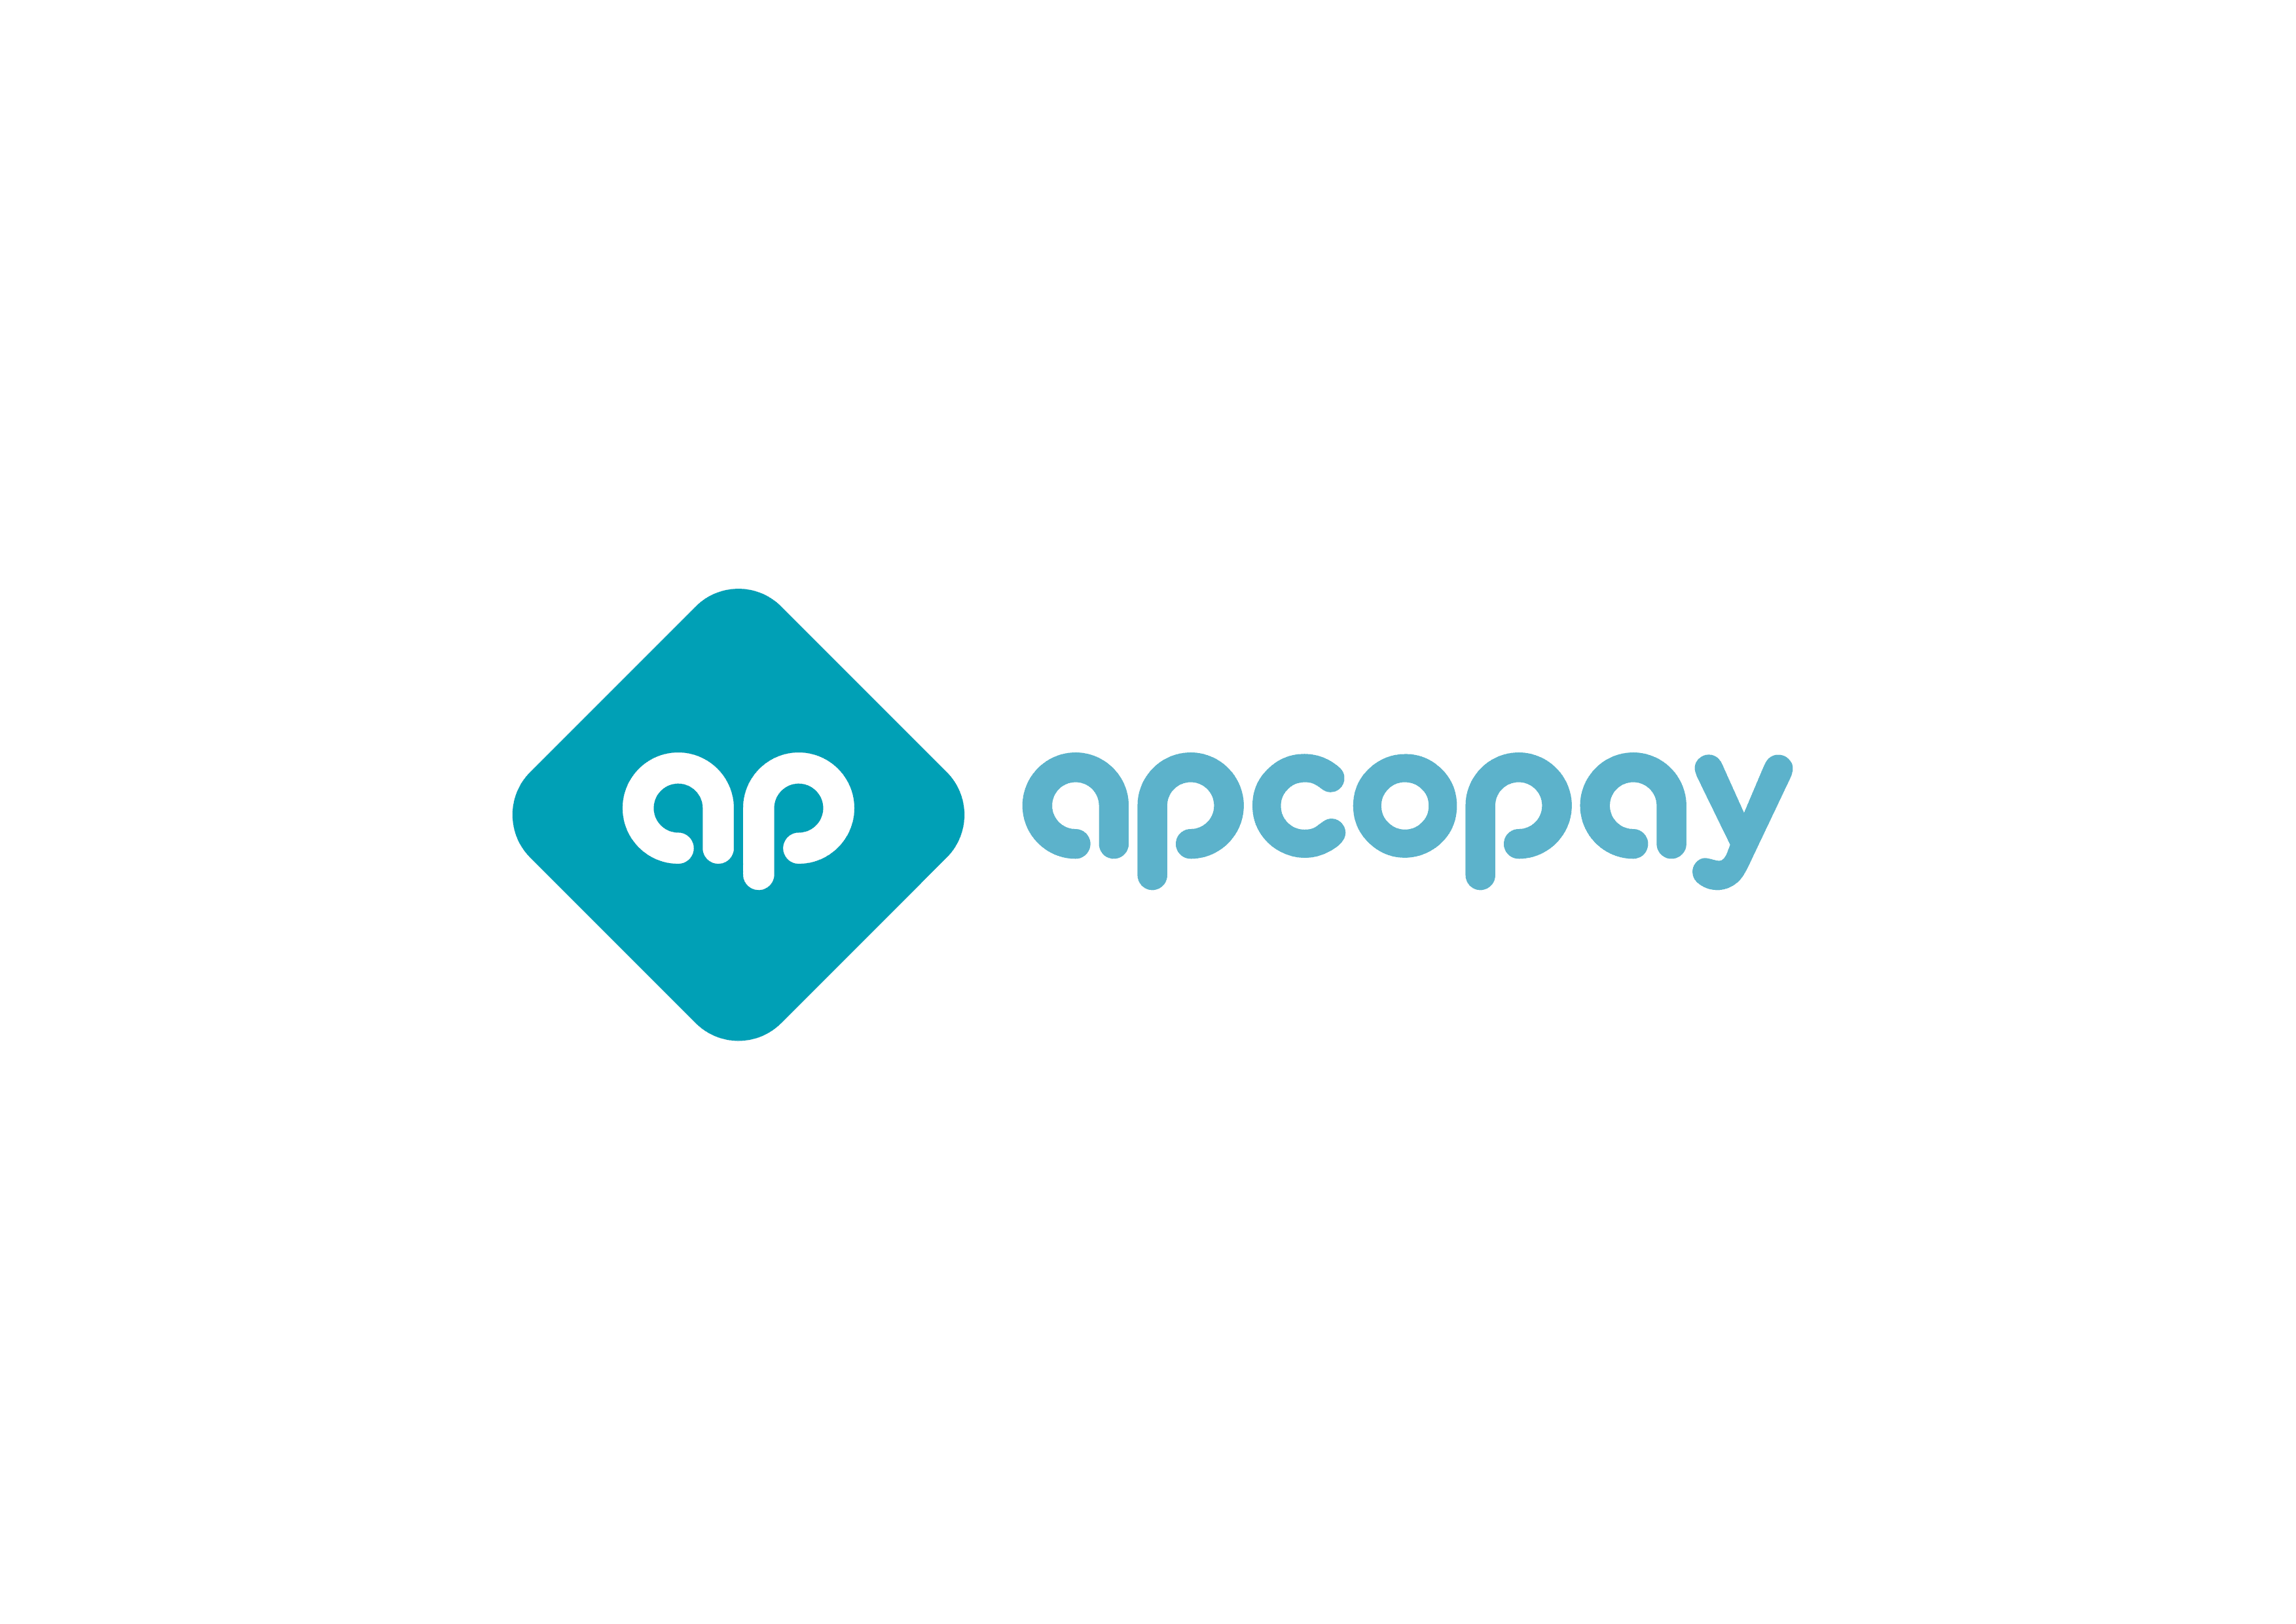 10 Live Casinos That Use ApcoPay for Secure Deposits